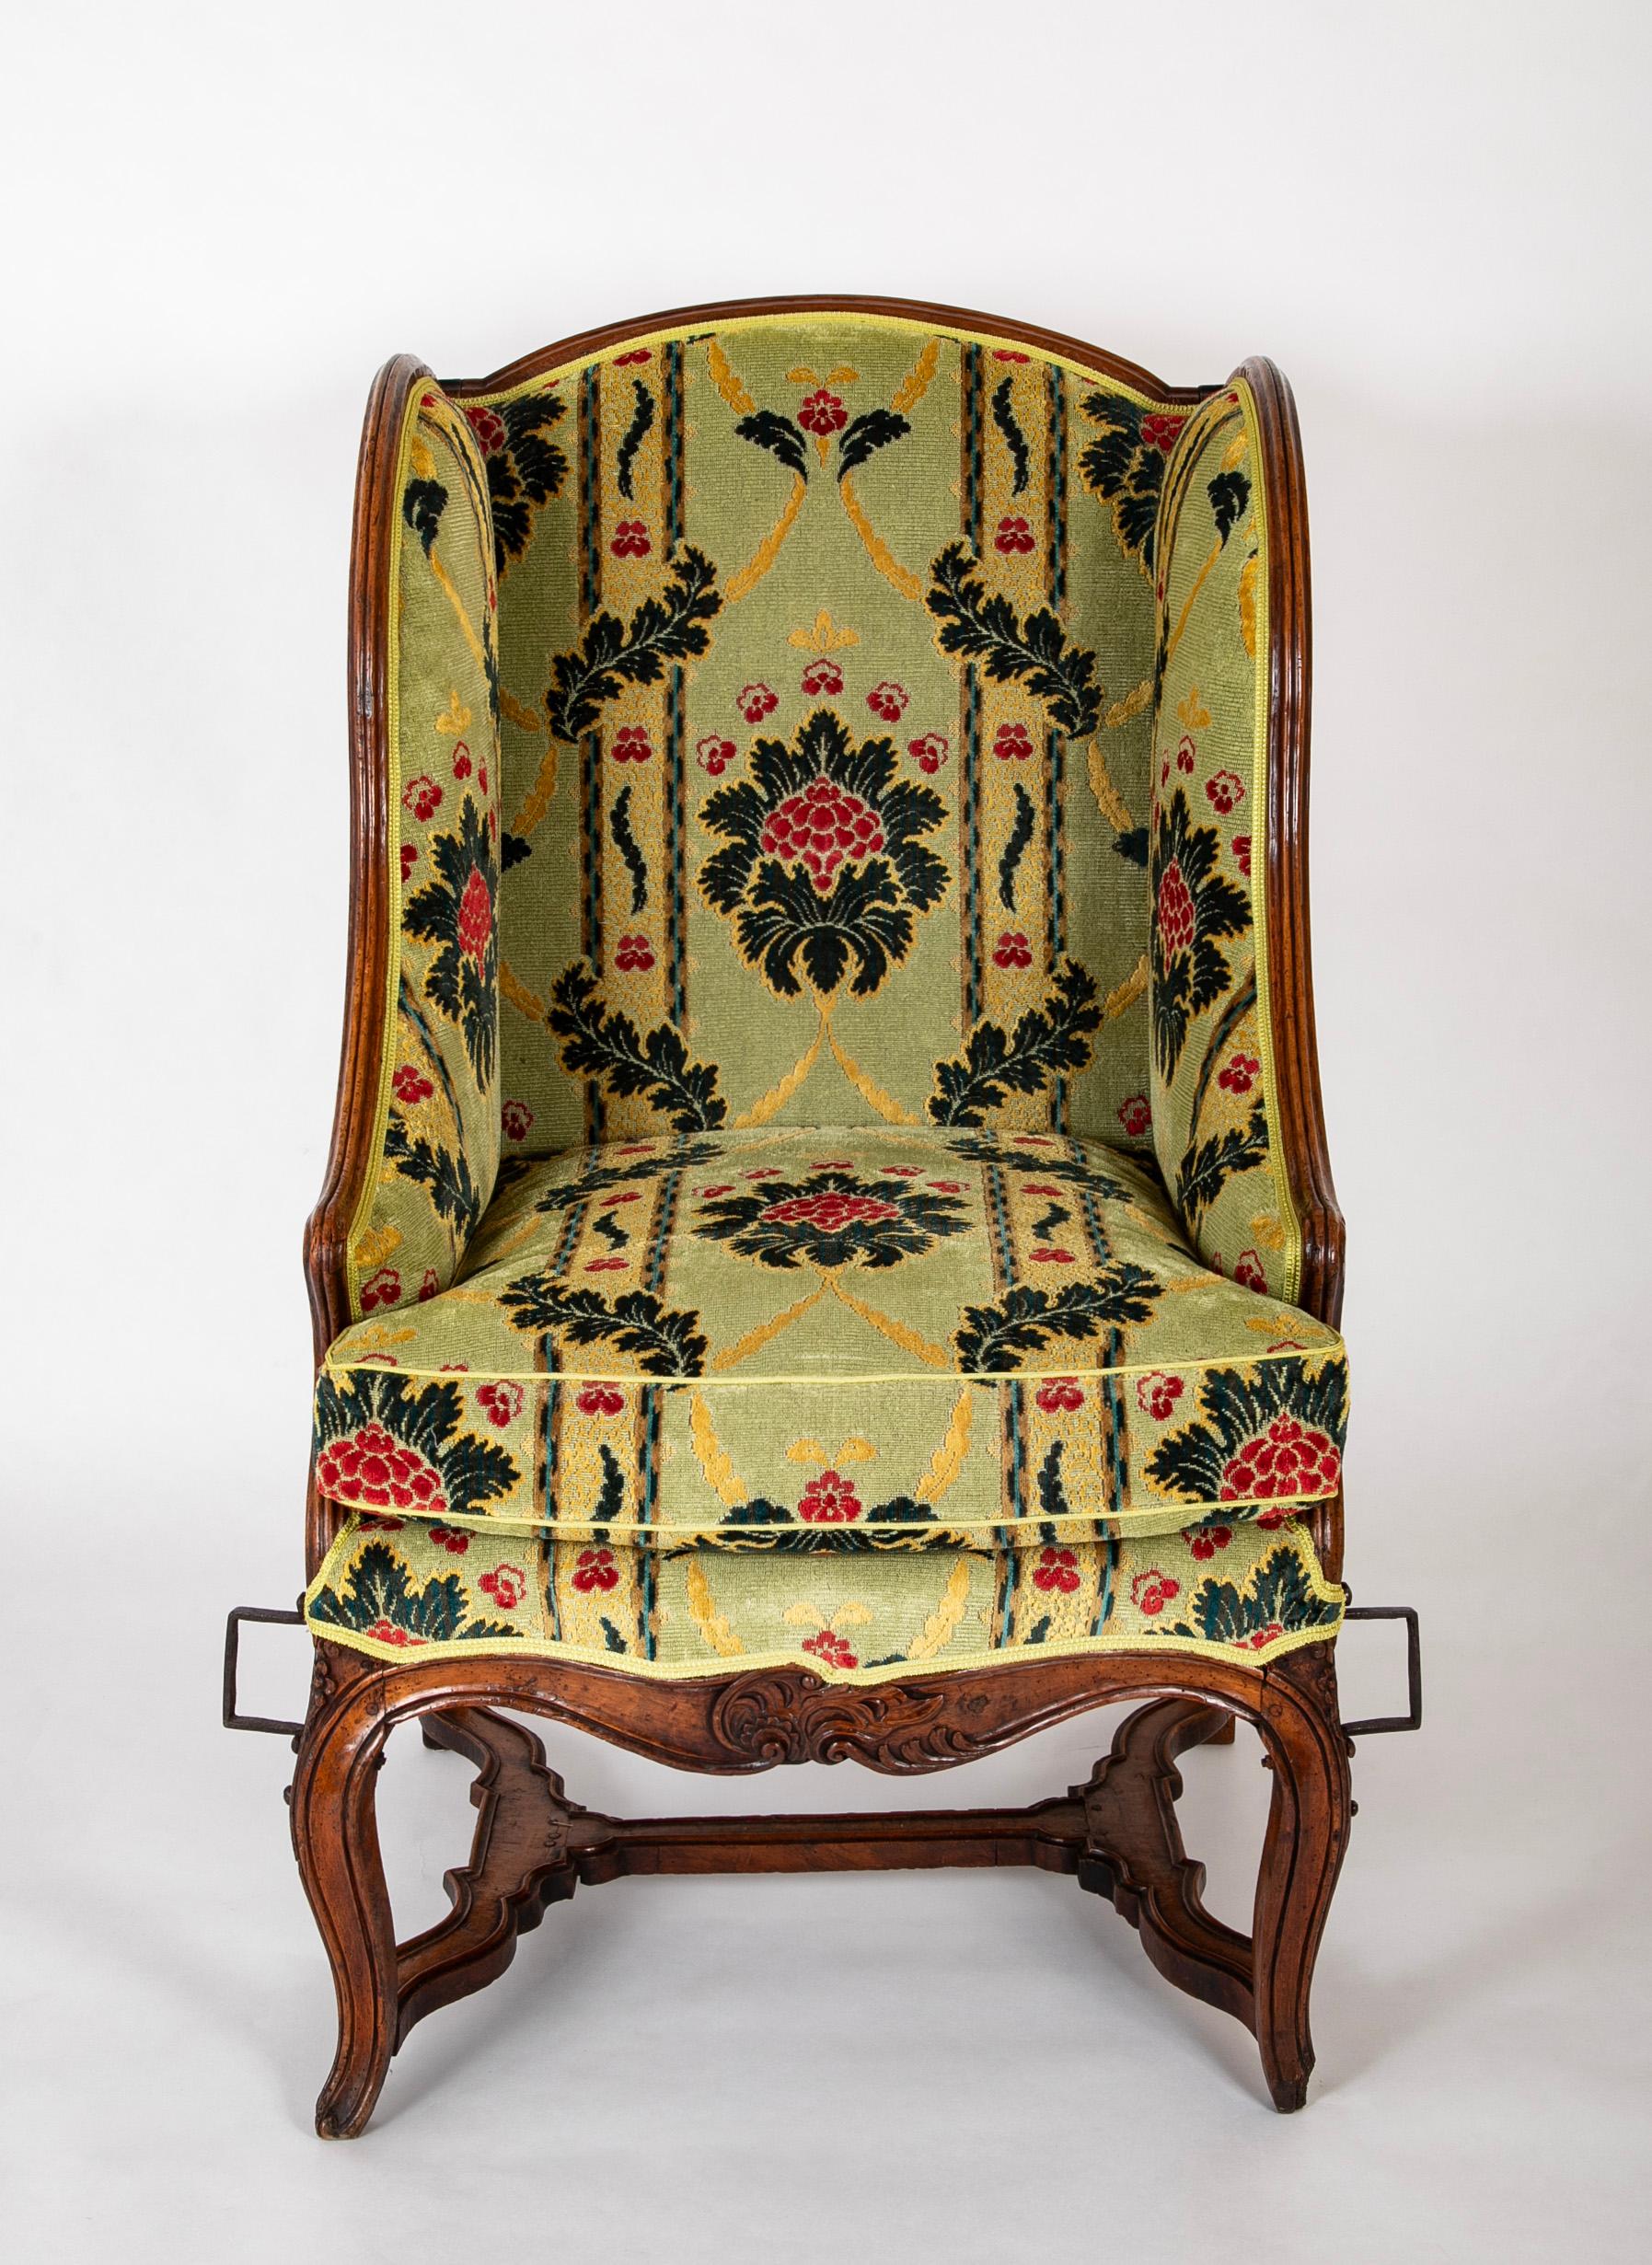 A handsome French Louis XV period grand scale carved walnut armchair later adapted with mounted handwrought iron brackets for sedan use.  18th century.